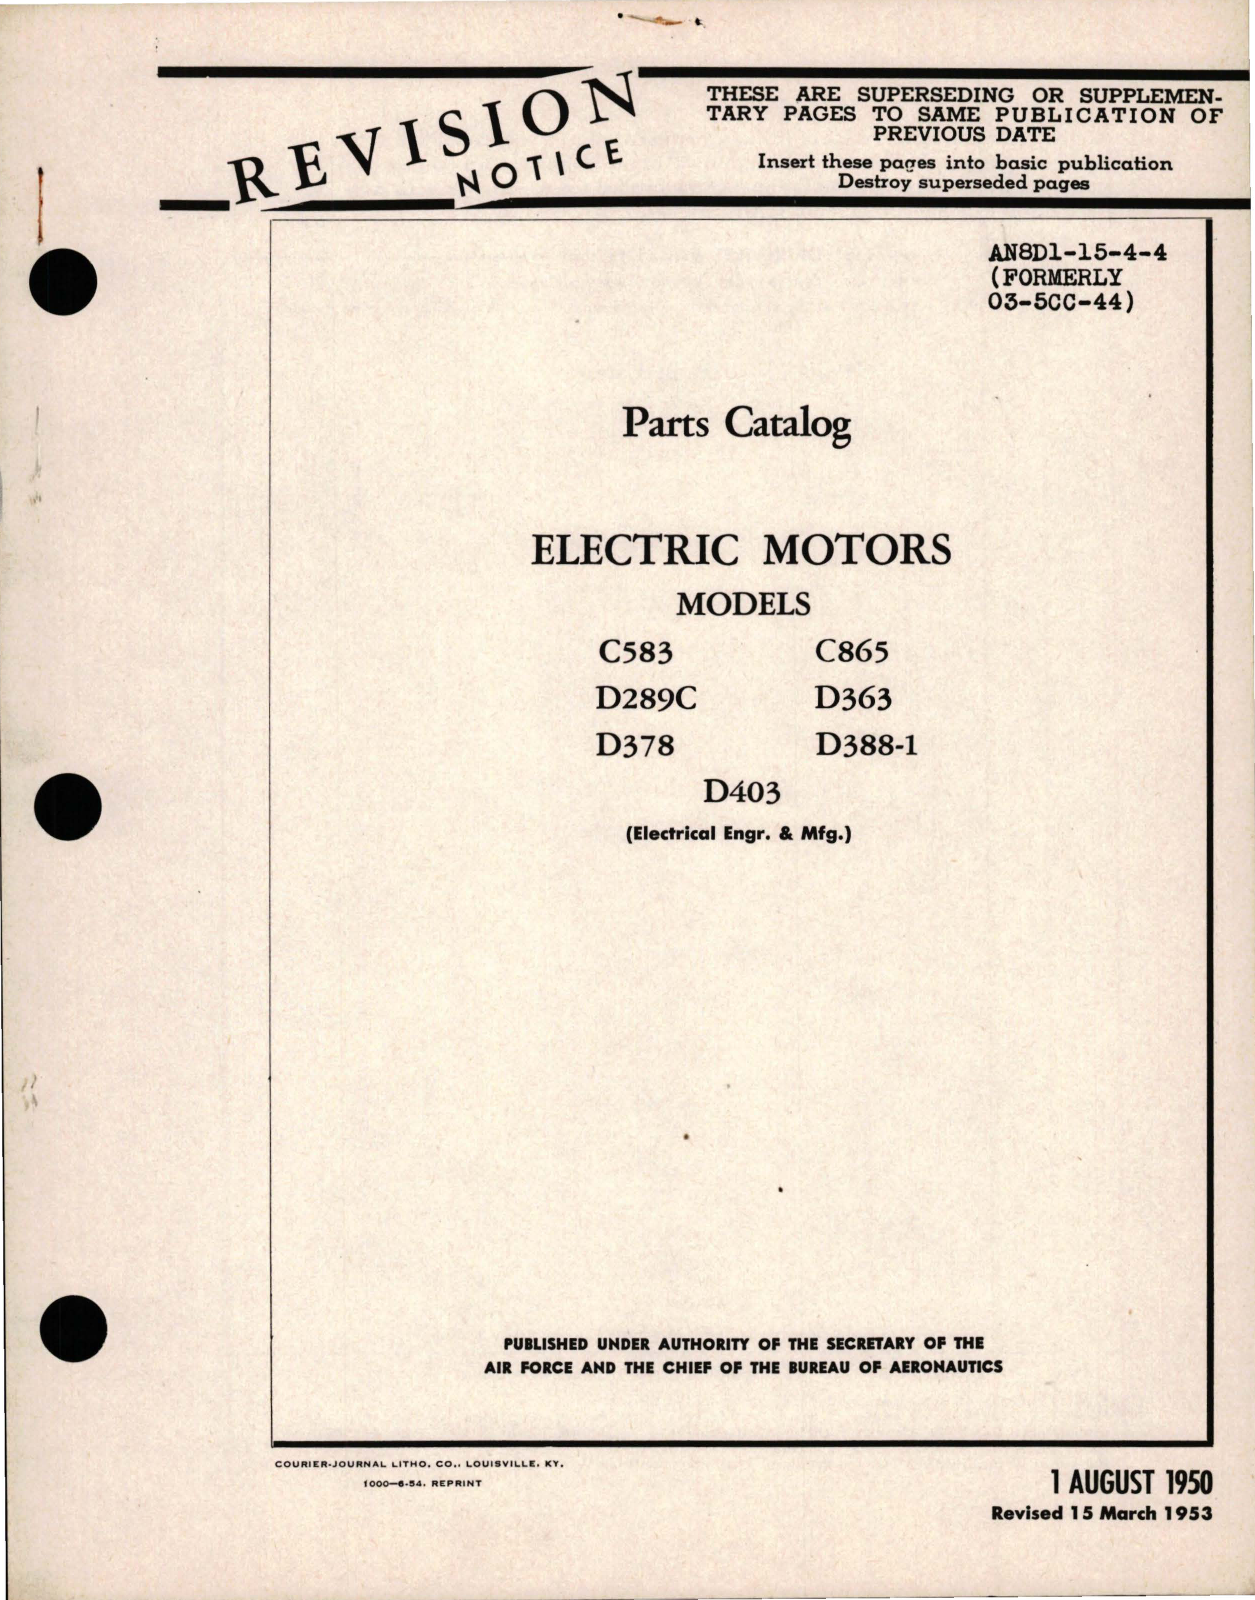 Sample page 1 from AirCorps Library document: Parts Catalog for Electric Motors - Models C583, C865, D289C, D363, D378, D388-1, D403